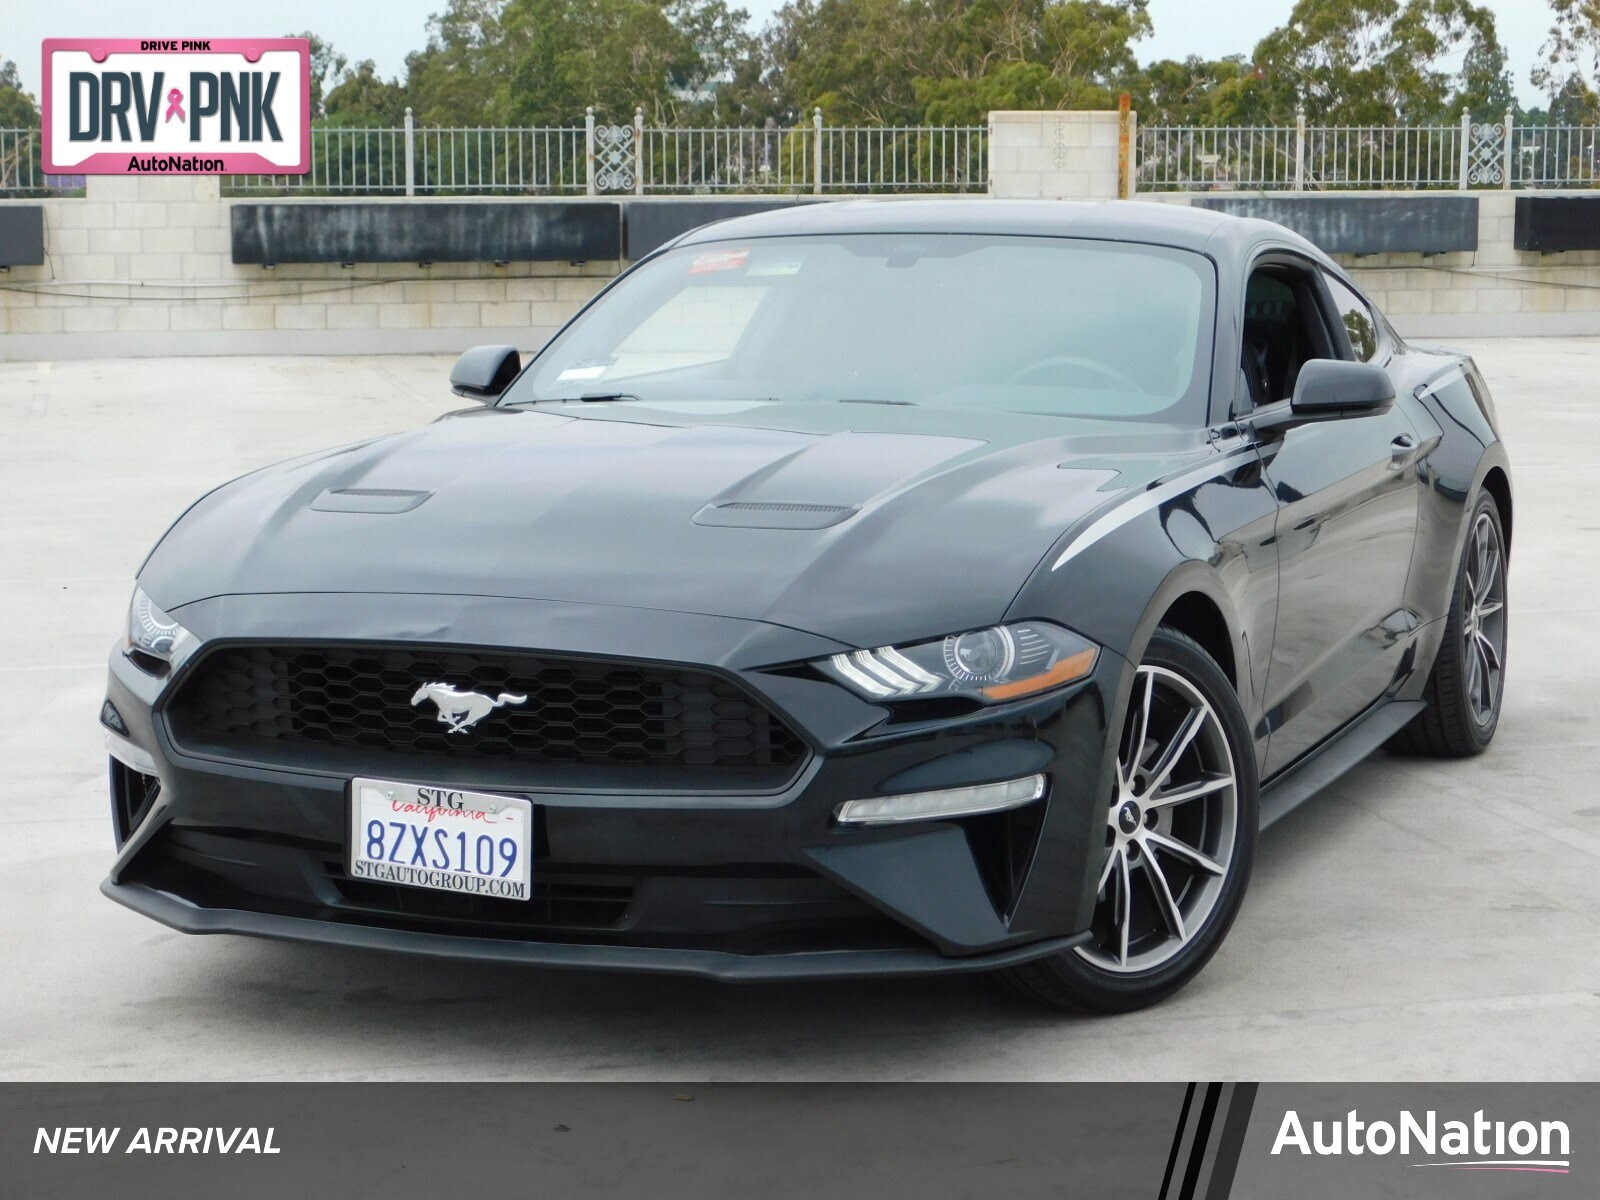 Used Ford Mustang Cerritos Ca